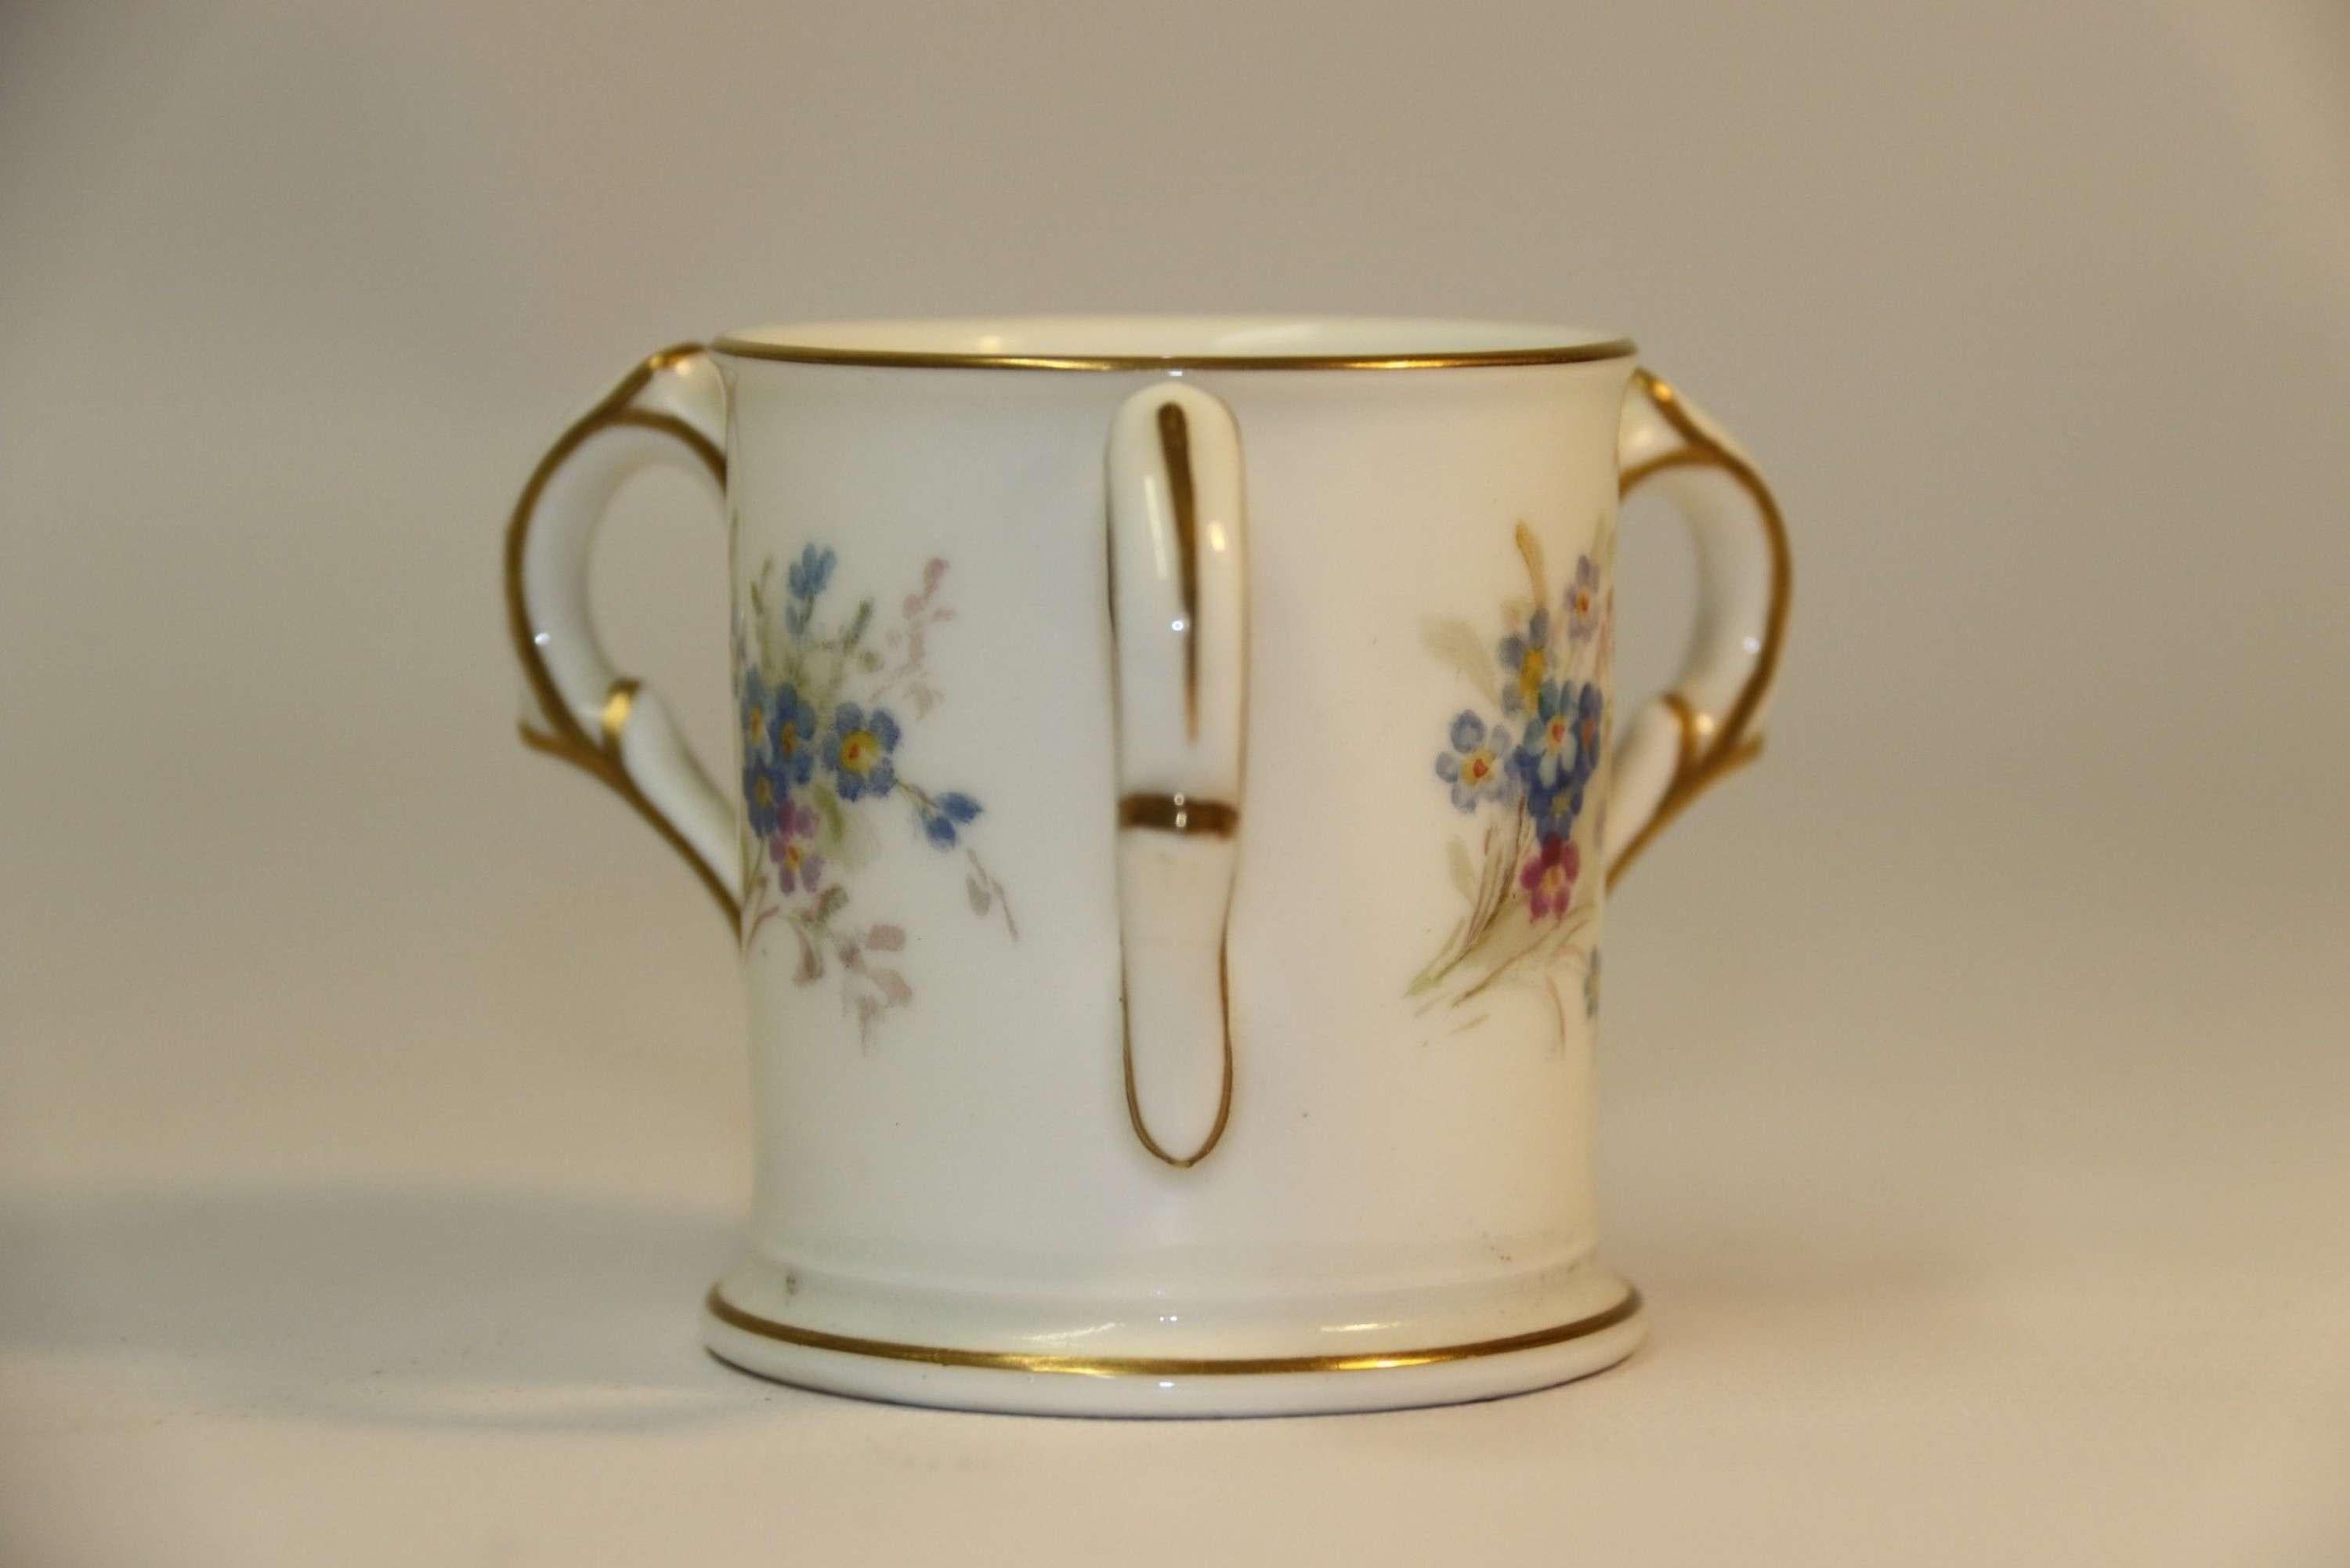 A Miniature Royal Worcester porcelain loving cup

This delightful early 20th century Royal Worcester porcelain miniature loving cup has a white ground with fabulous hand painted sprays of forget-me-nots. These are centralised between the three